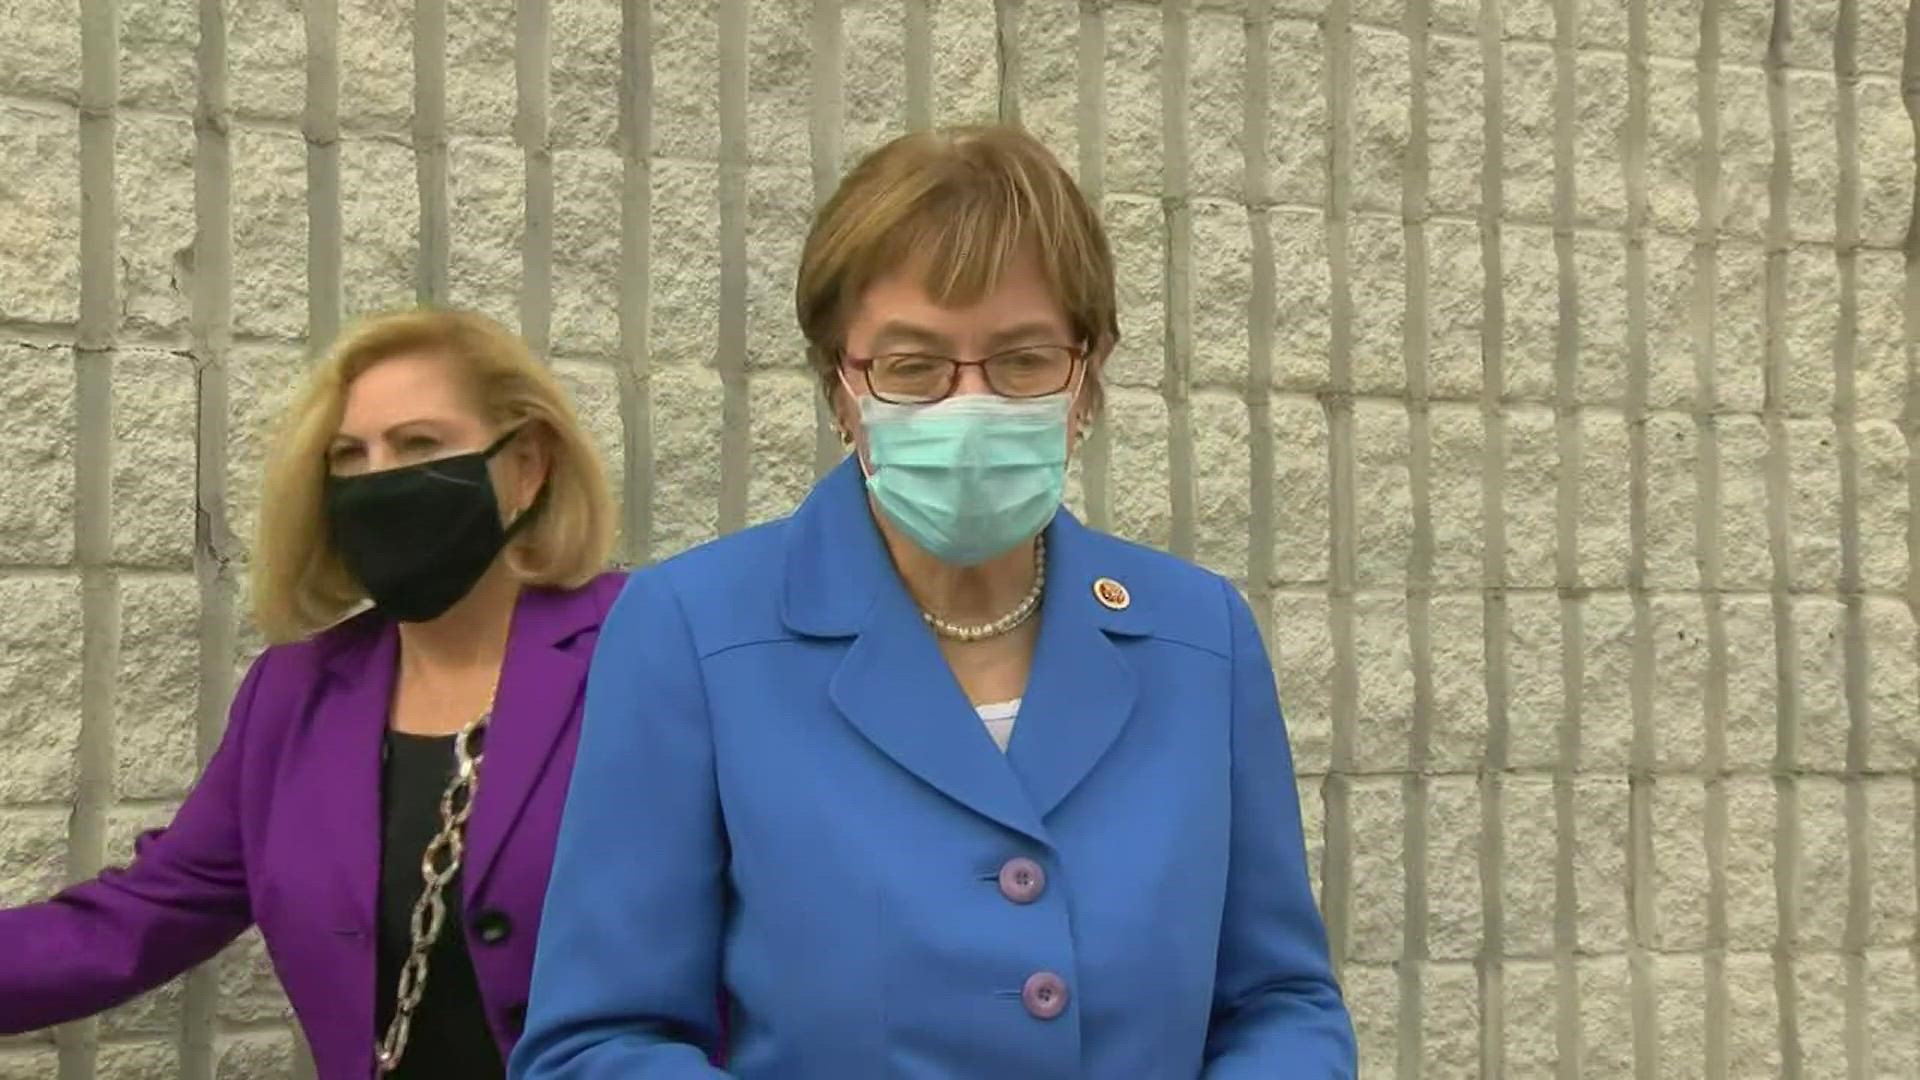 Kaptur was one several lawmakers trapped in the upper House Gallery during the riot. At least 3 lawmakers have tested positive since that day.